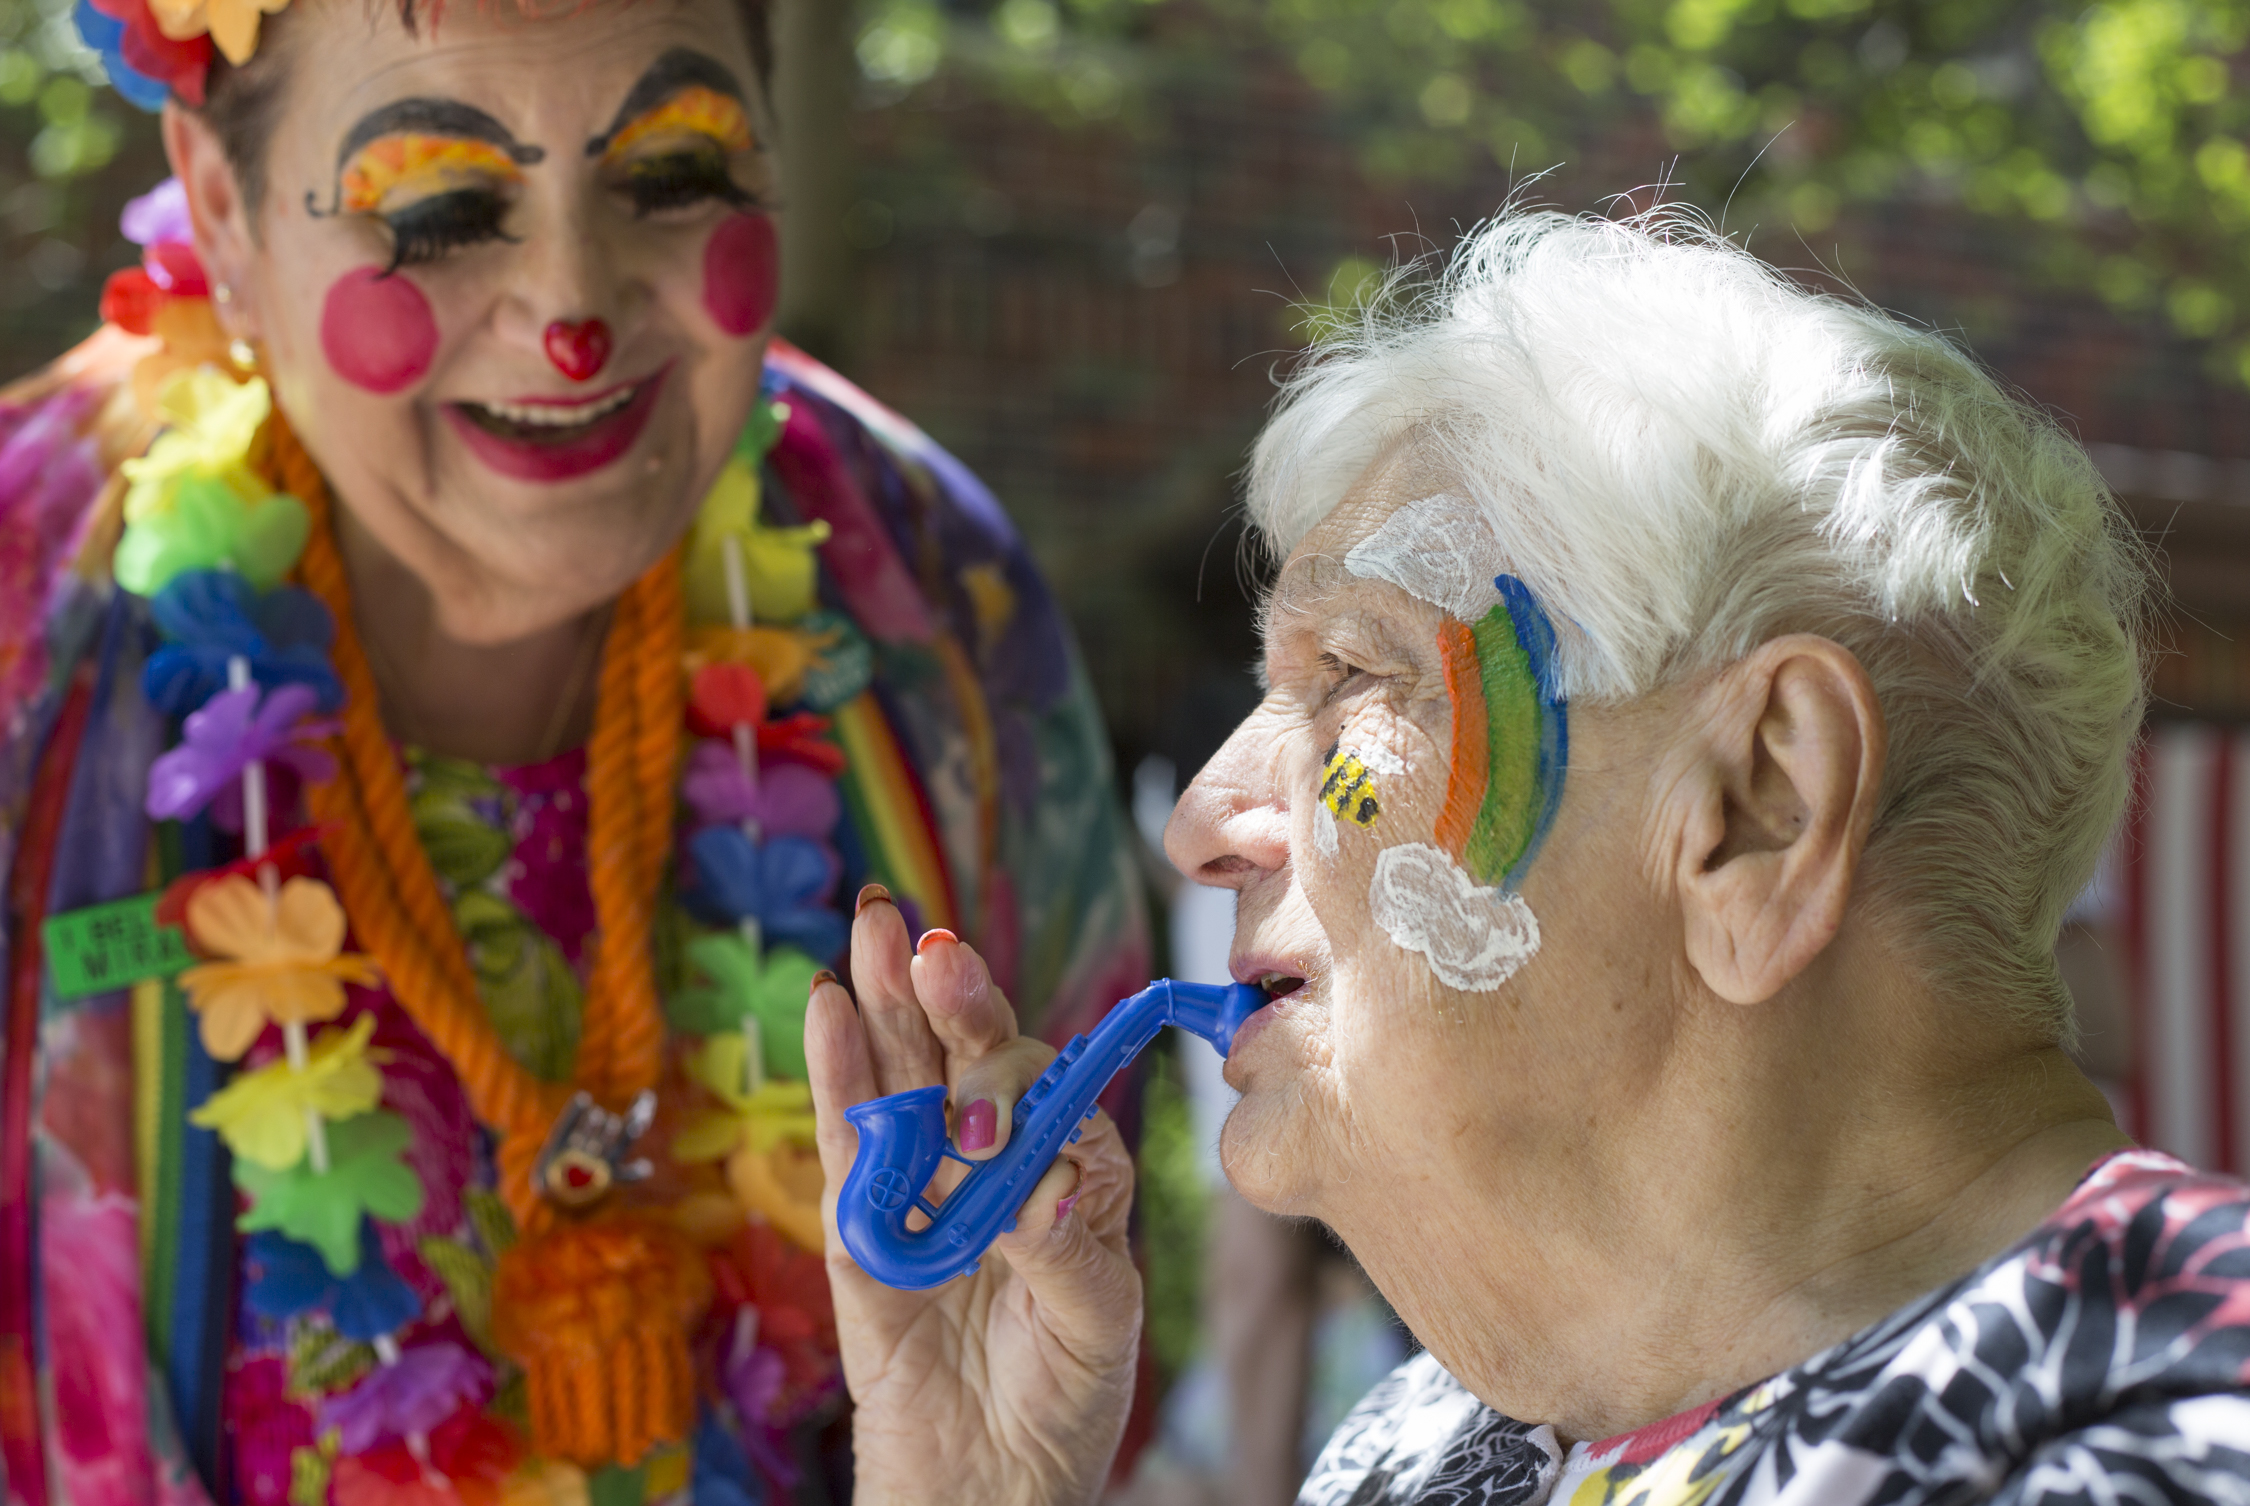  Natalie Shoop, left, dressed as Lovie the Clown, watches as Martha Parise, a resident of the nursing home Villa St. Joseph, blows into a saxophone-shaped whistle Shoop gave her during a carnival at Villa St. Joseph in Baden, Pa. on June 3, 2017. The